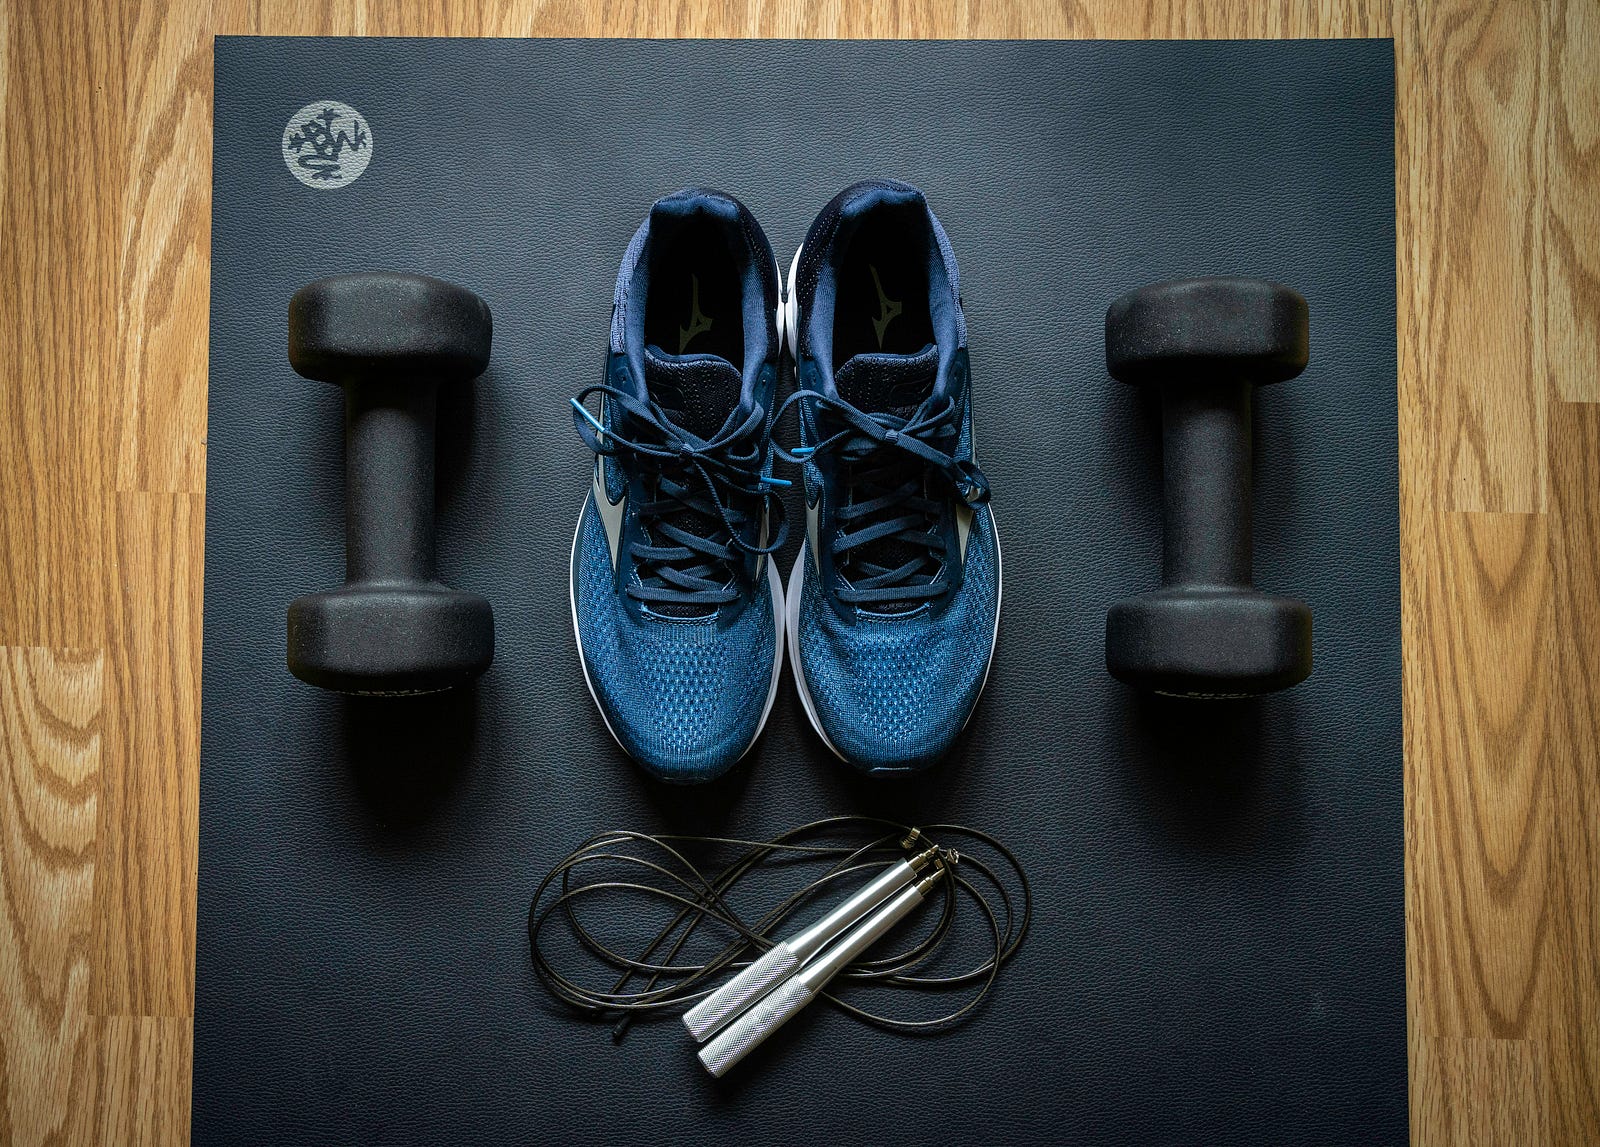 Two blue sneakers, flanked by small dumbbells. A jumprope is in the foreground. The photo is from above.